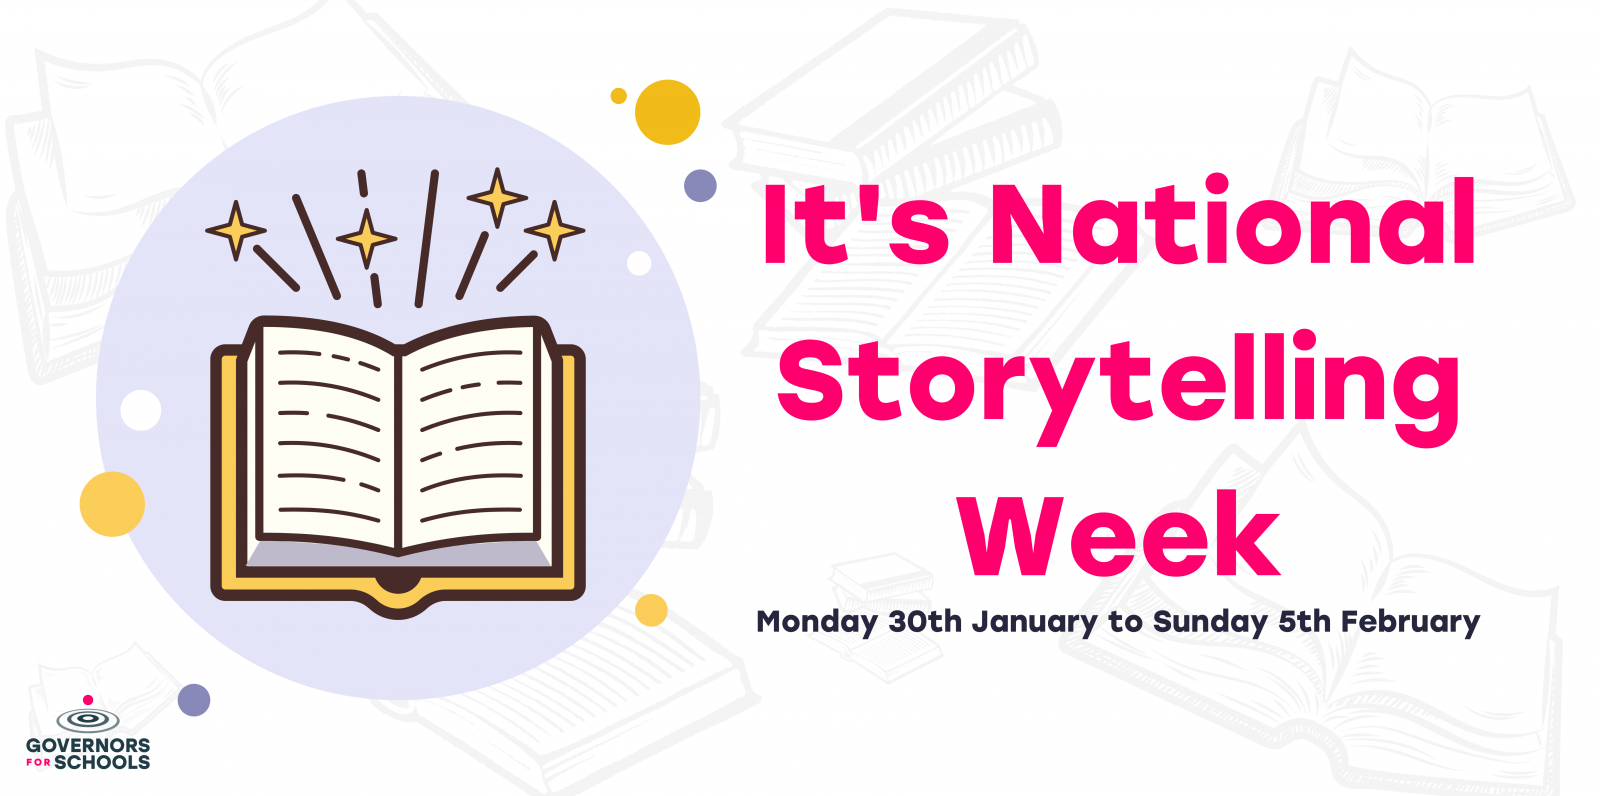 Feed pupils’ imaginations this National Storytelling Week Governors